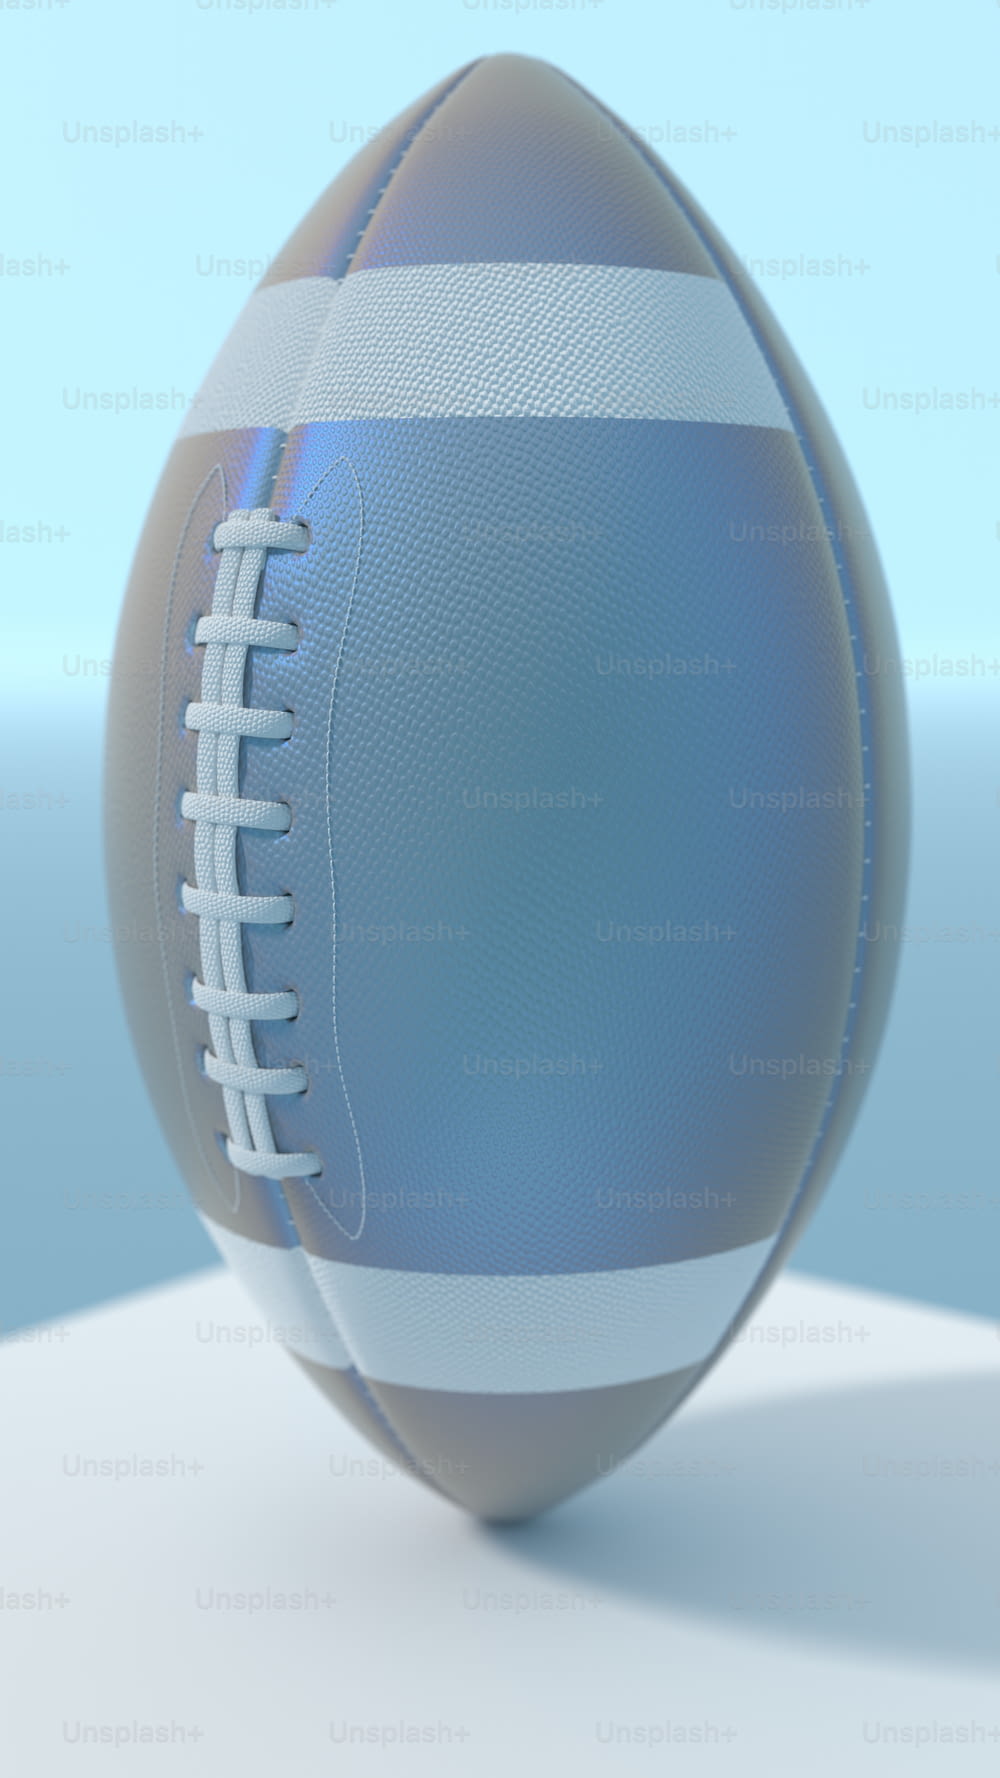 a close up of a football on a white surface